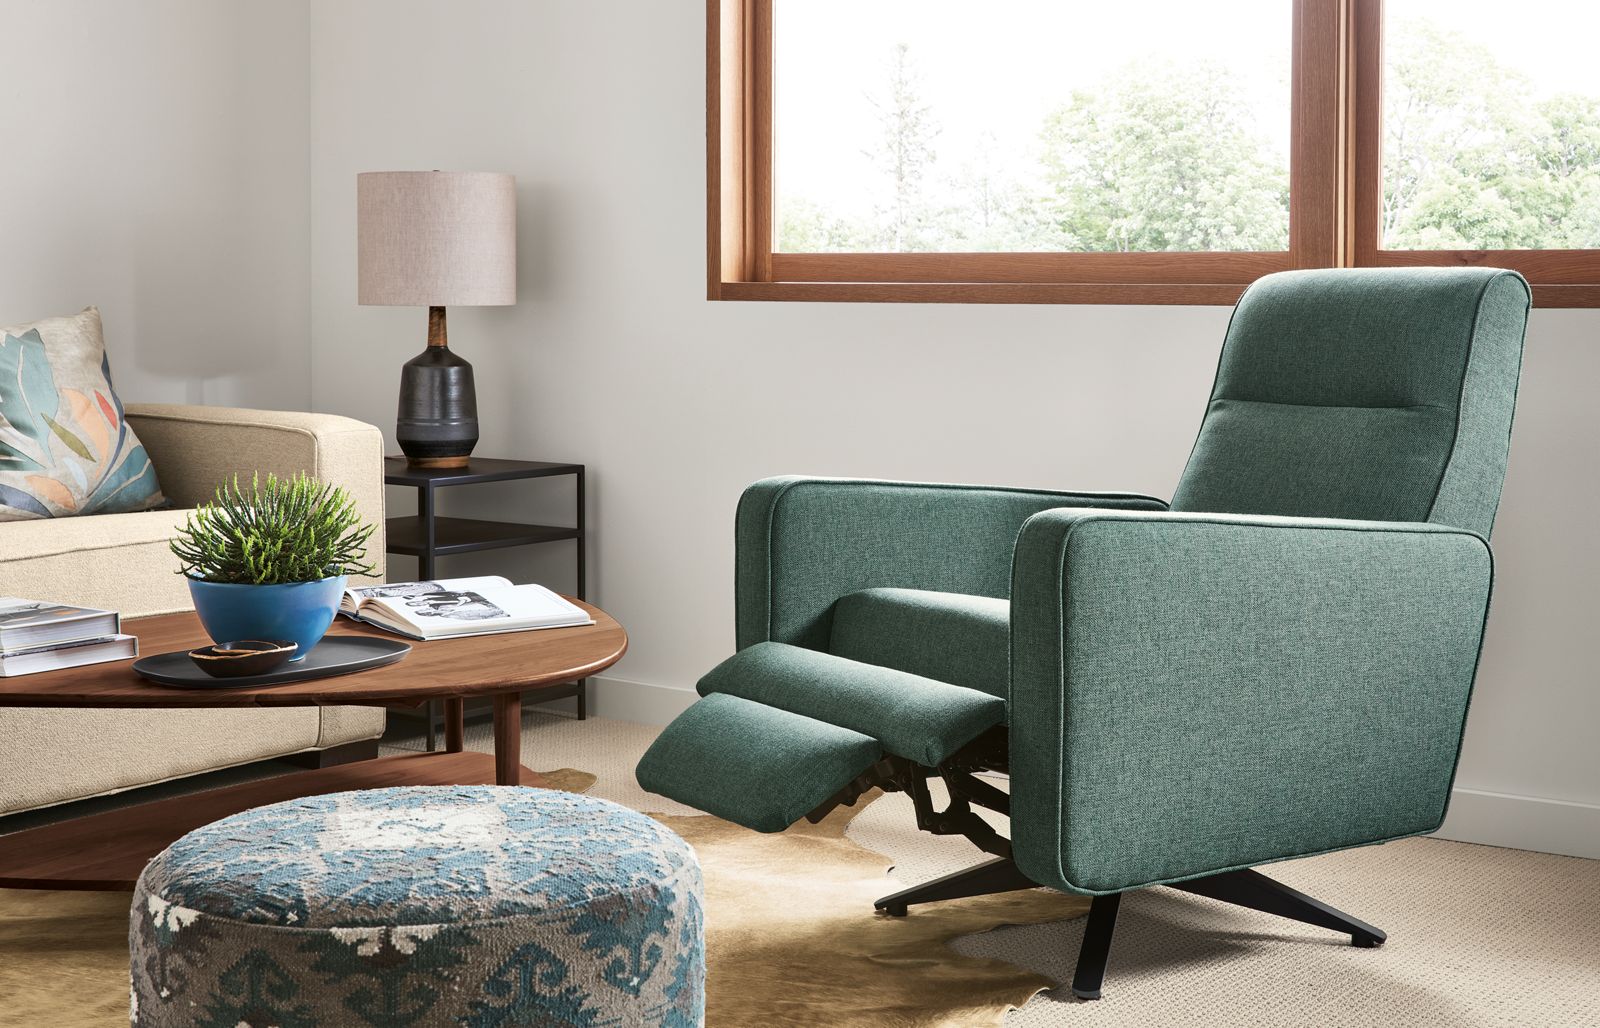 Hayden recliner in turquoise fabric extended in living room.